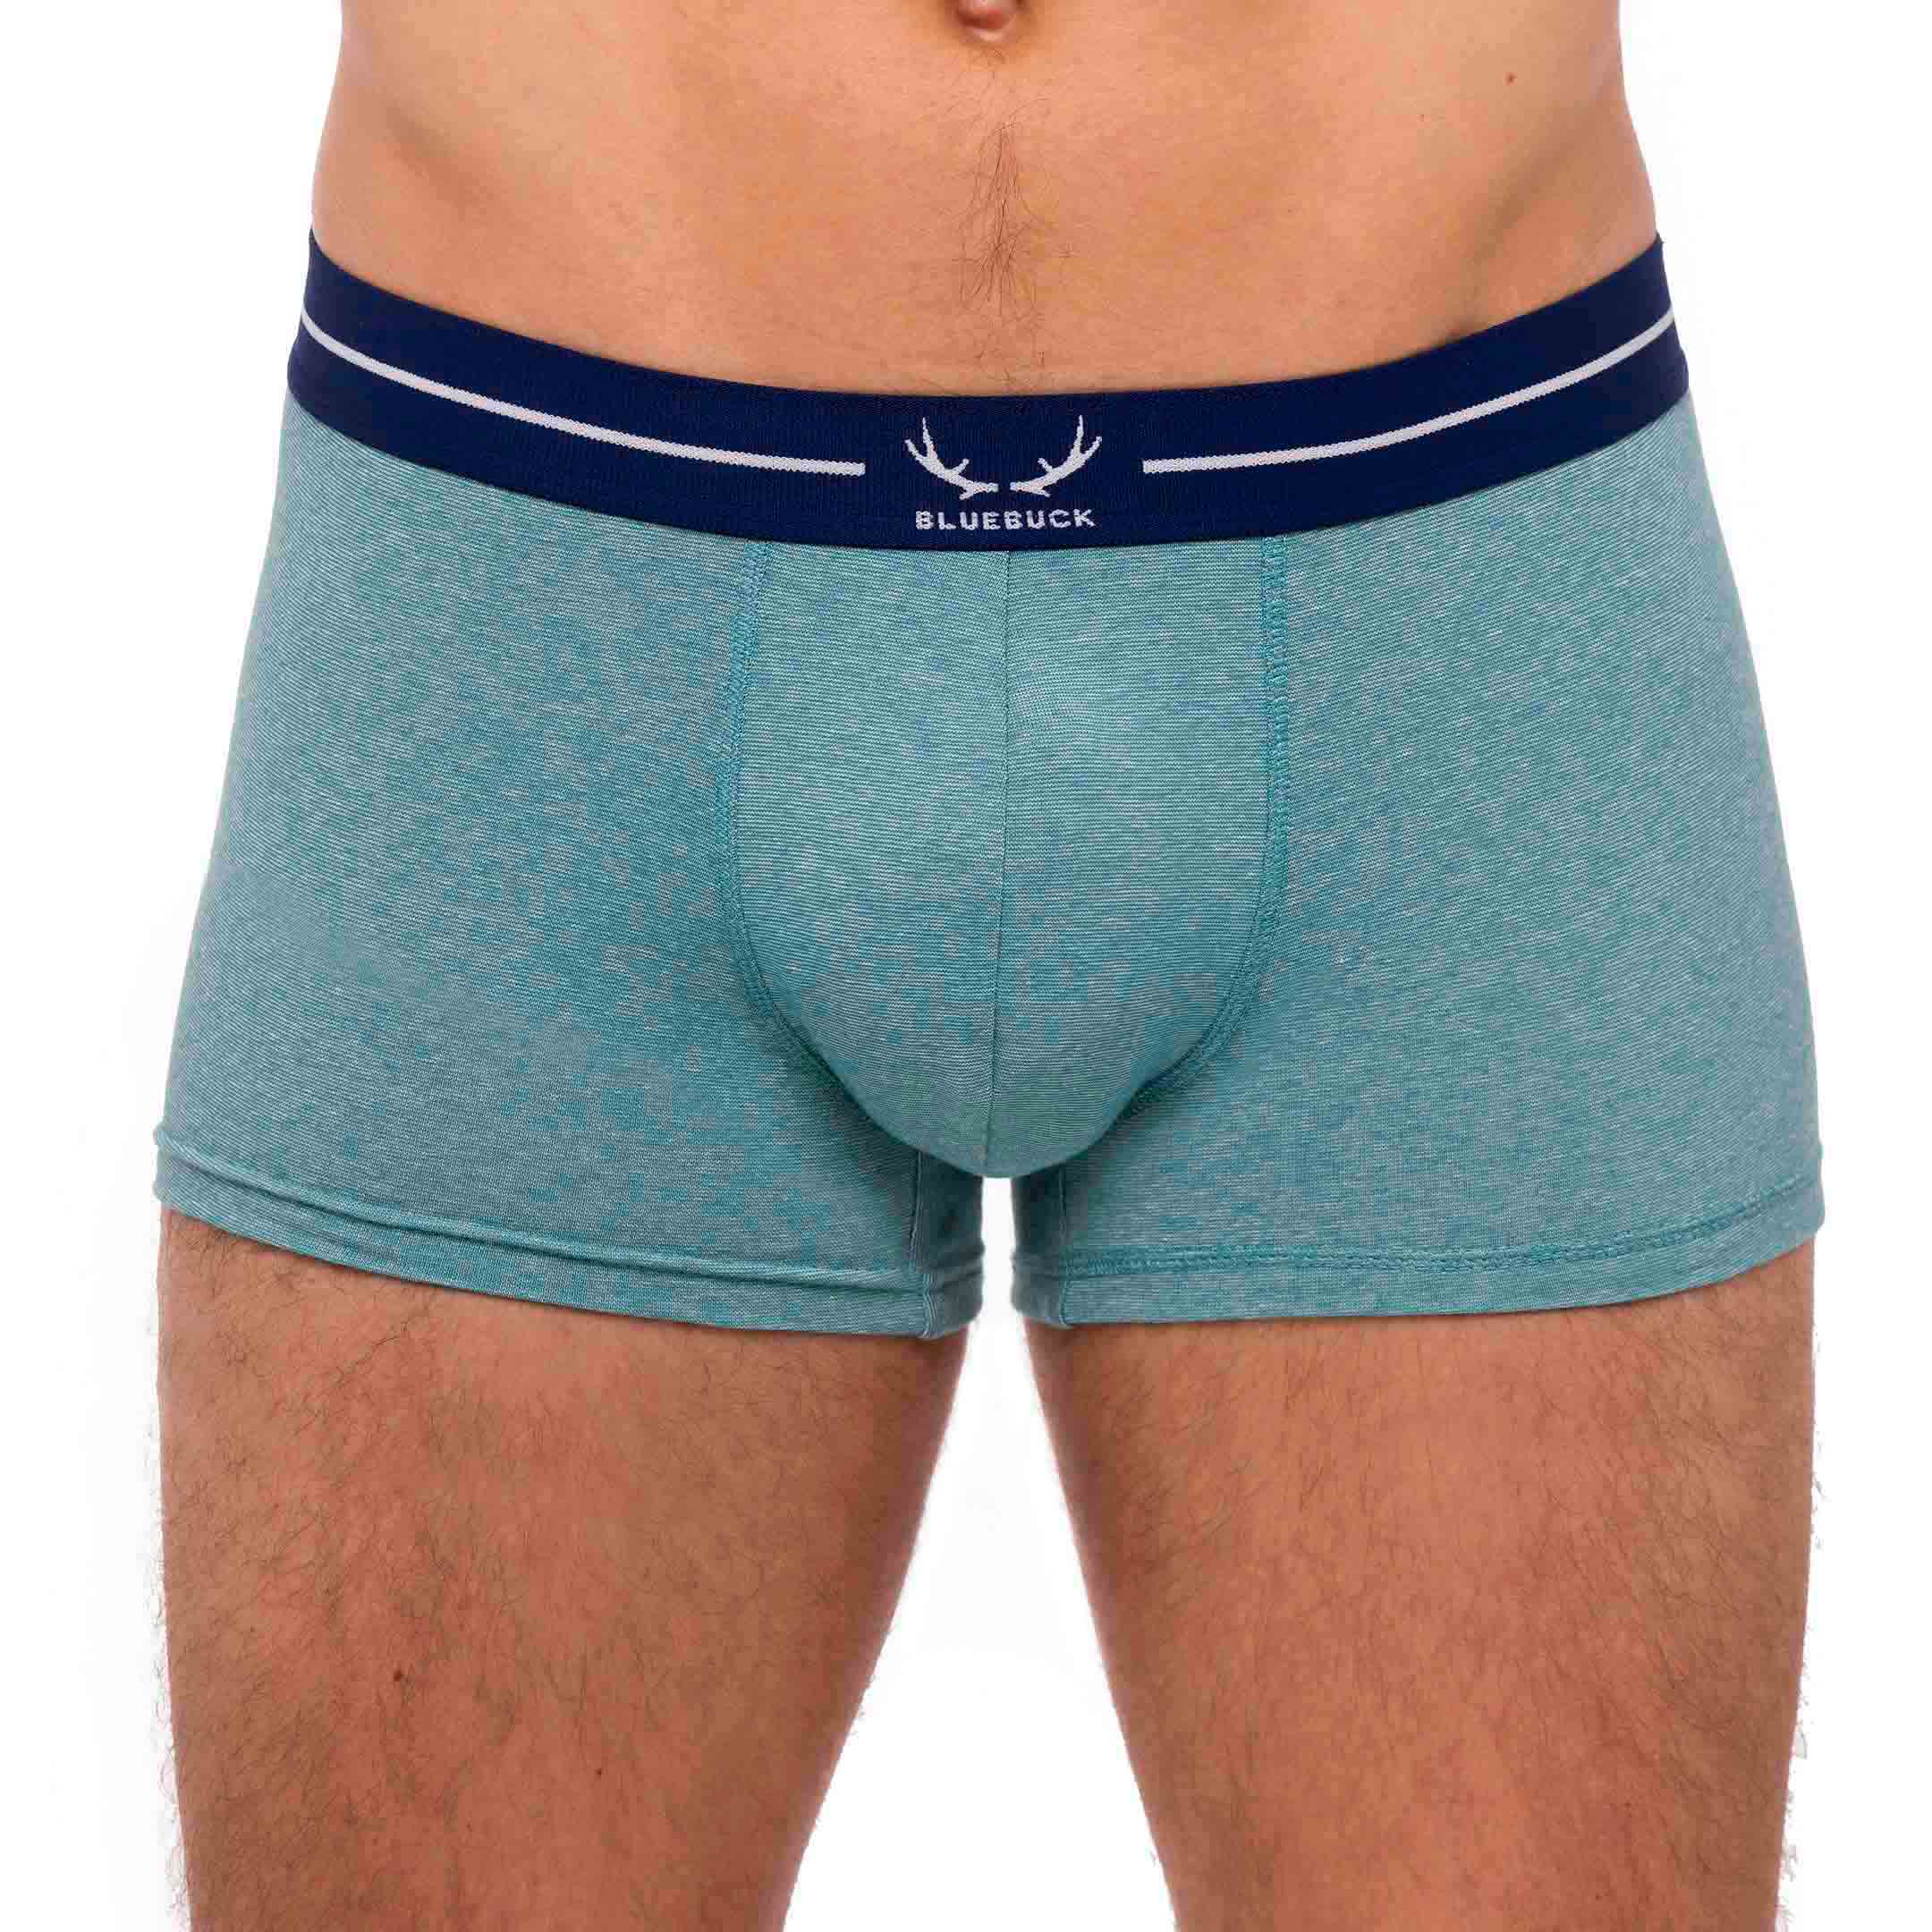 Mint green boxer shorts made of organic cotton and Seaqual from Bluebuck